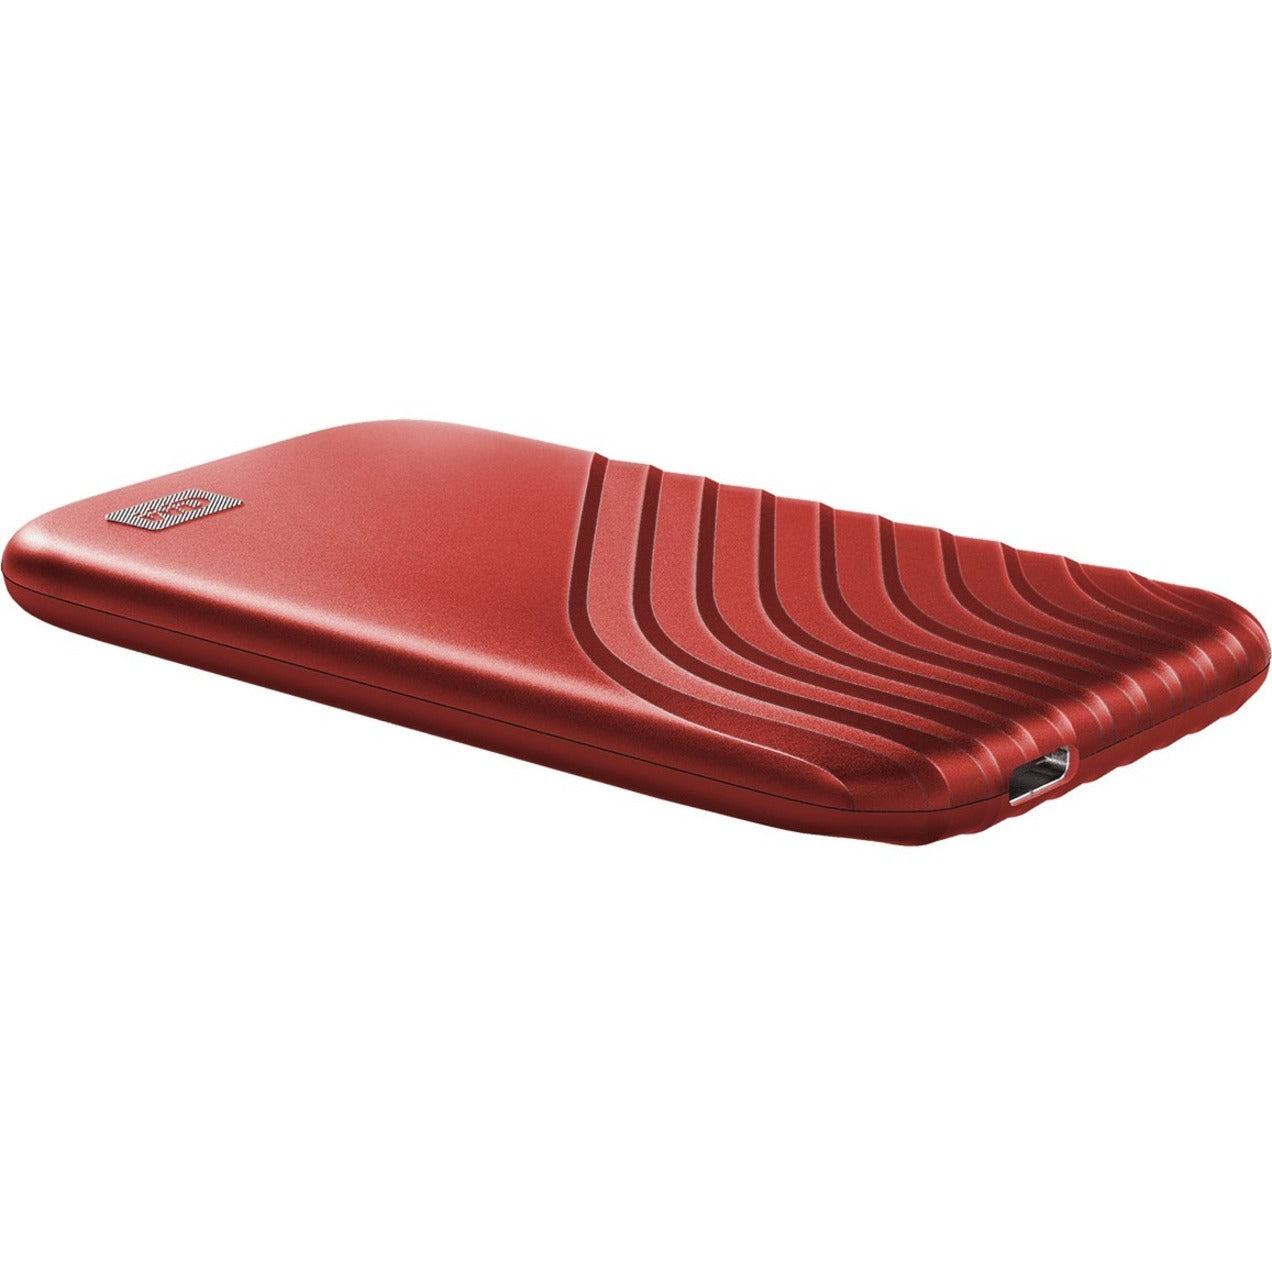 WD WDBAGF0010BRD-WESN My Passport Solid State Drive, 1 TB, USB 3.2 (Gen 2) Type C, Red